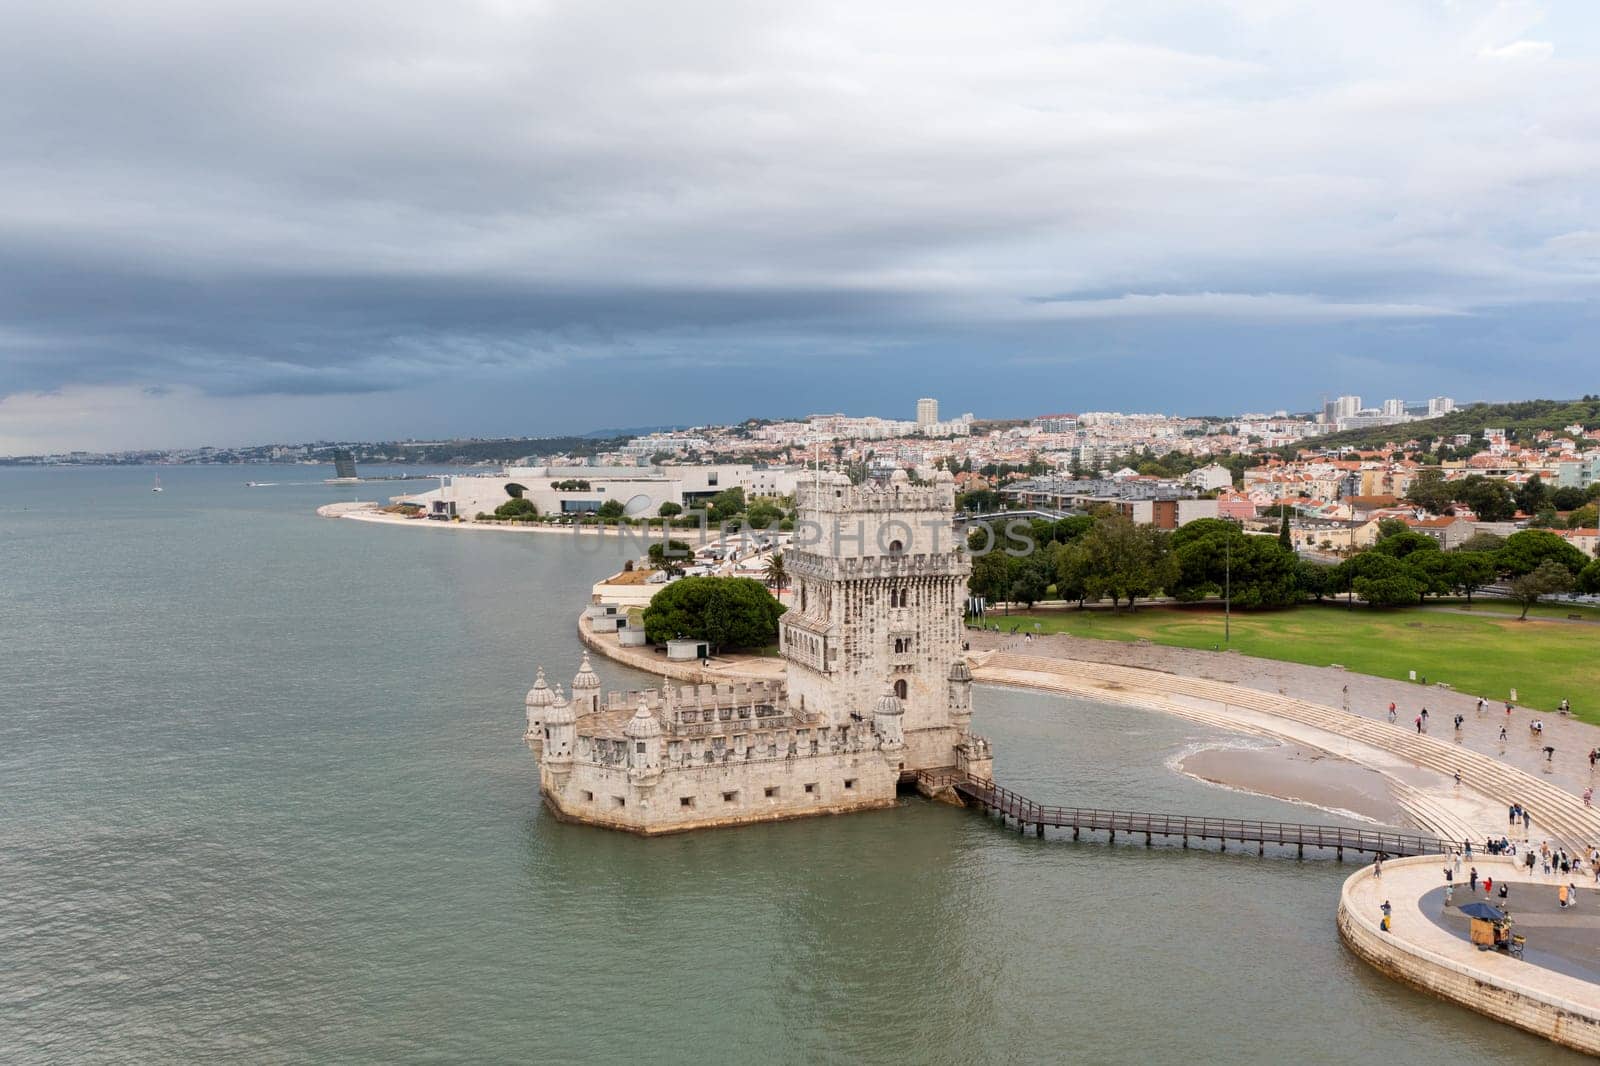 Aerial view Belem Tower on Tagus river in Lisbon, Portugal Evening time by andreonegin